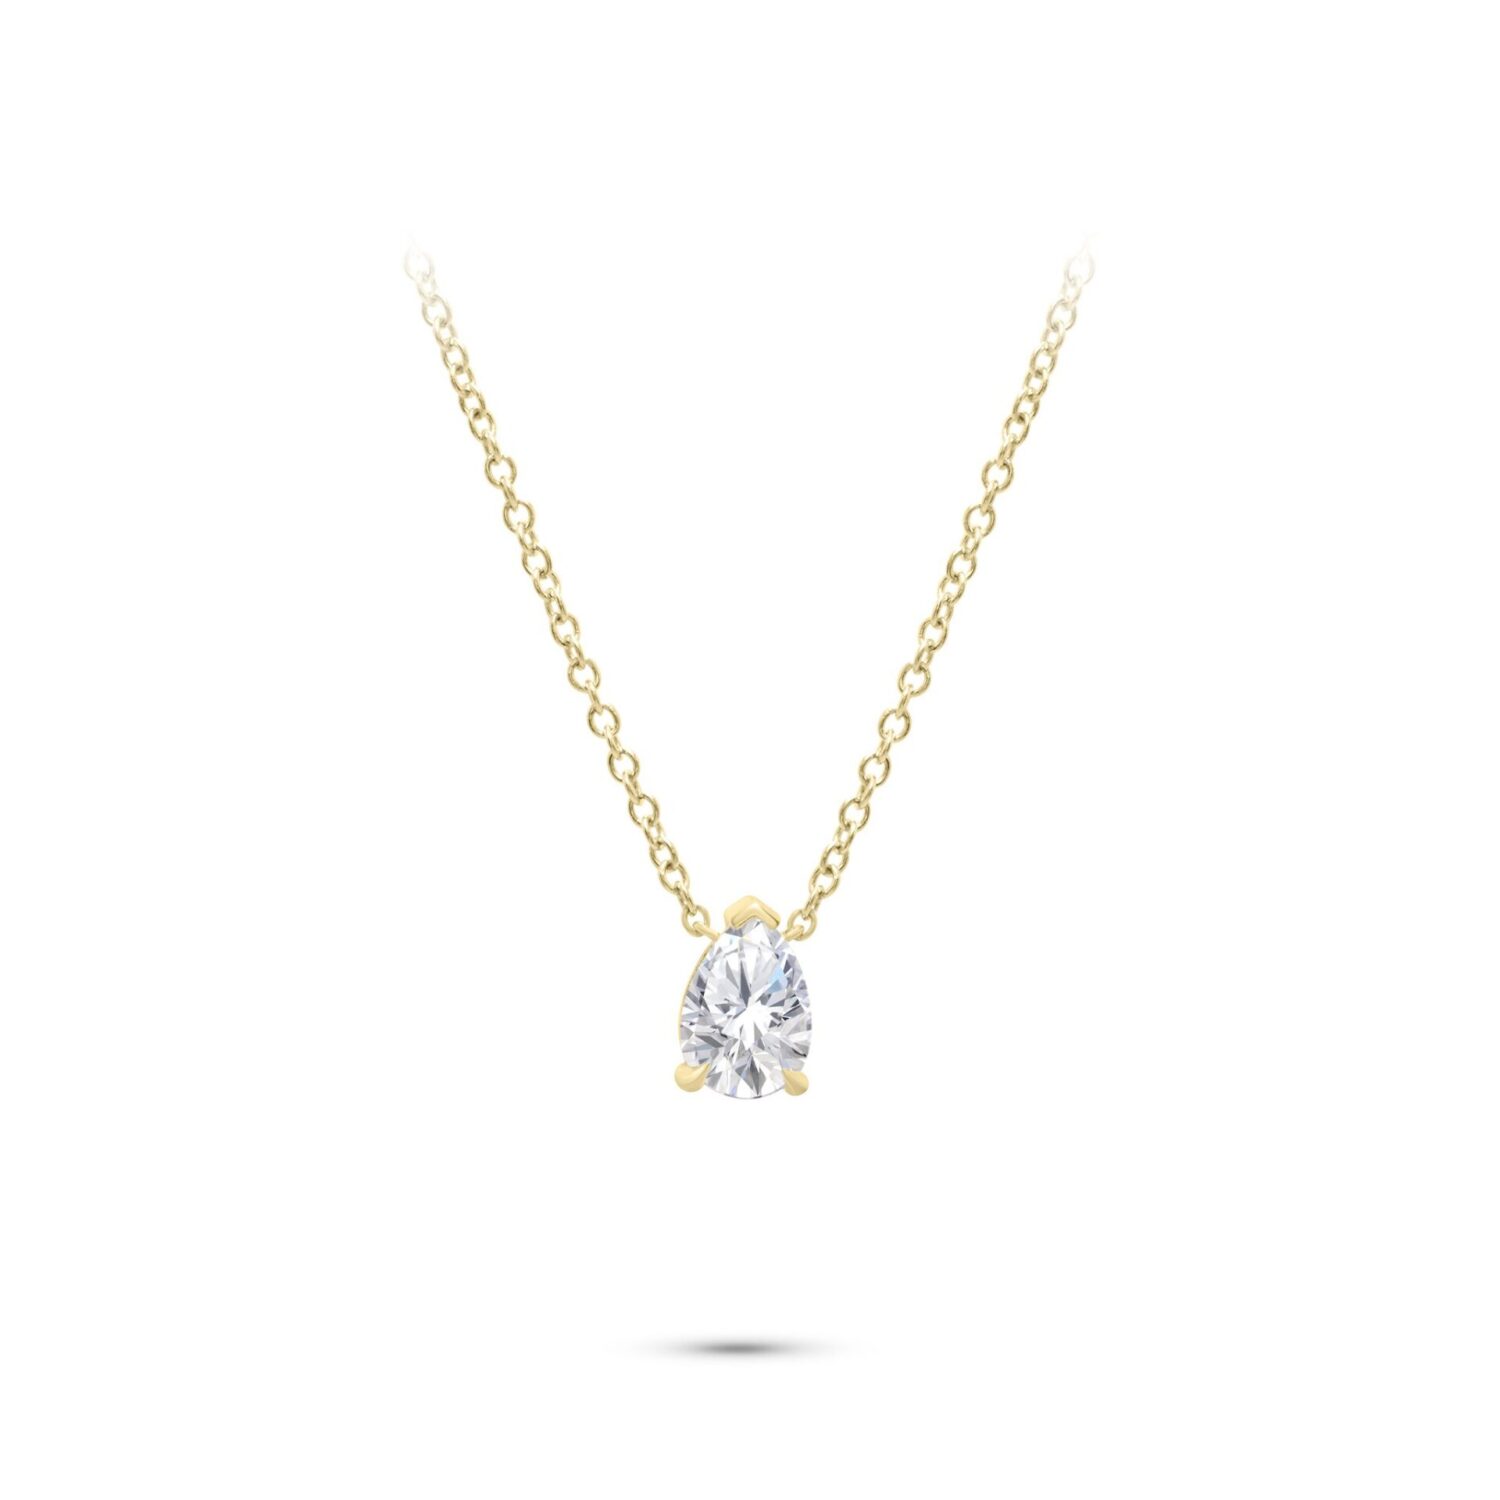 Lab grown diamonds in Cyprus - Drop Necklace  1 Carat best quality and price